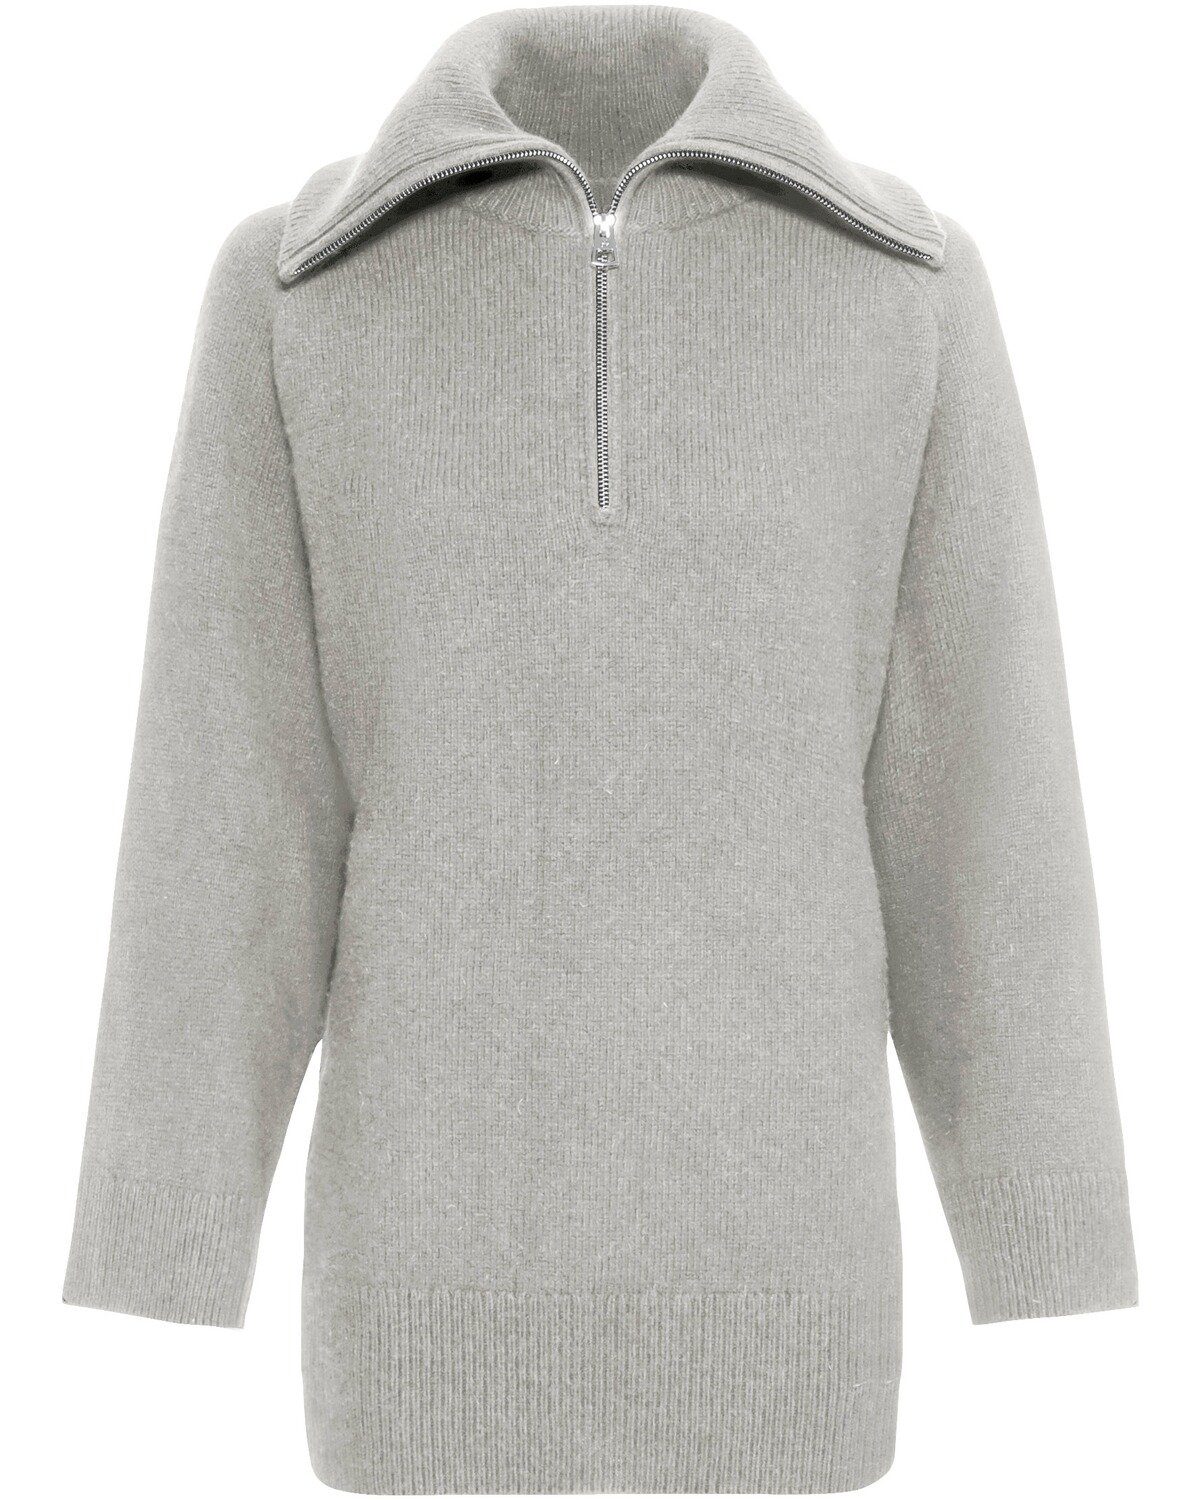 Marc O'Polo Strickpullover Strick-Troyer